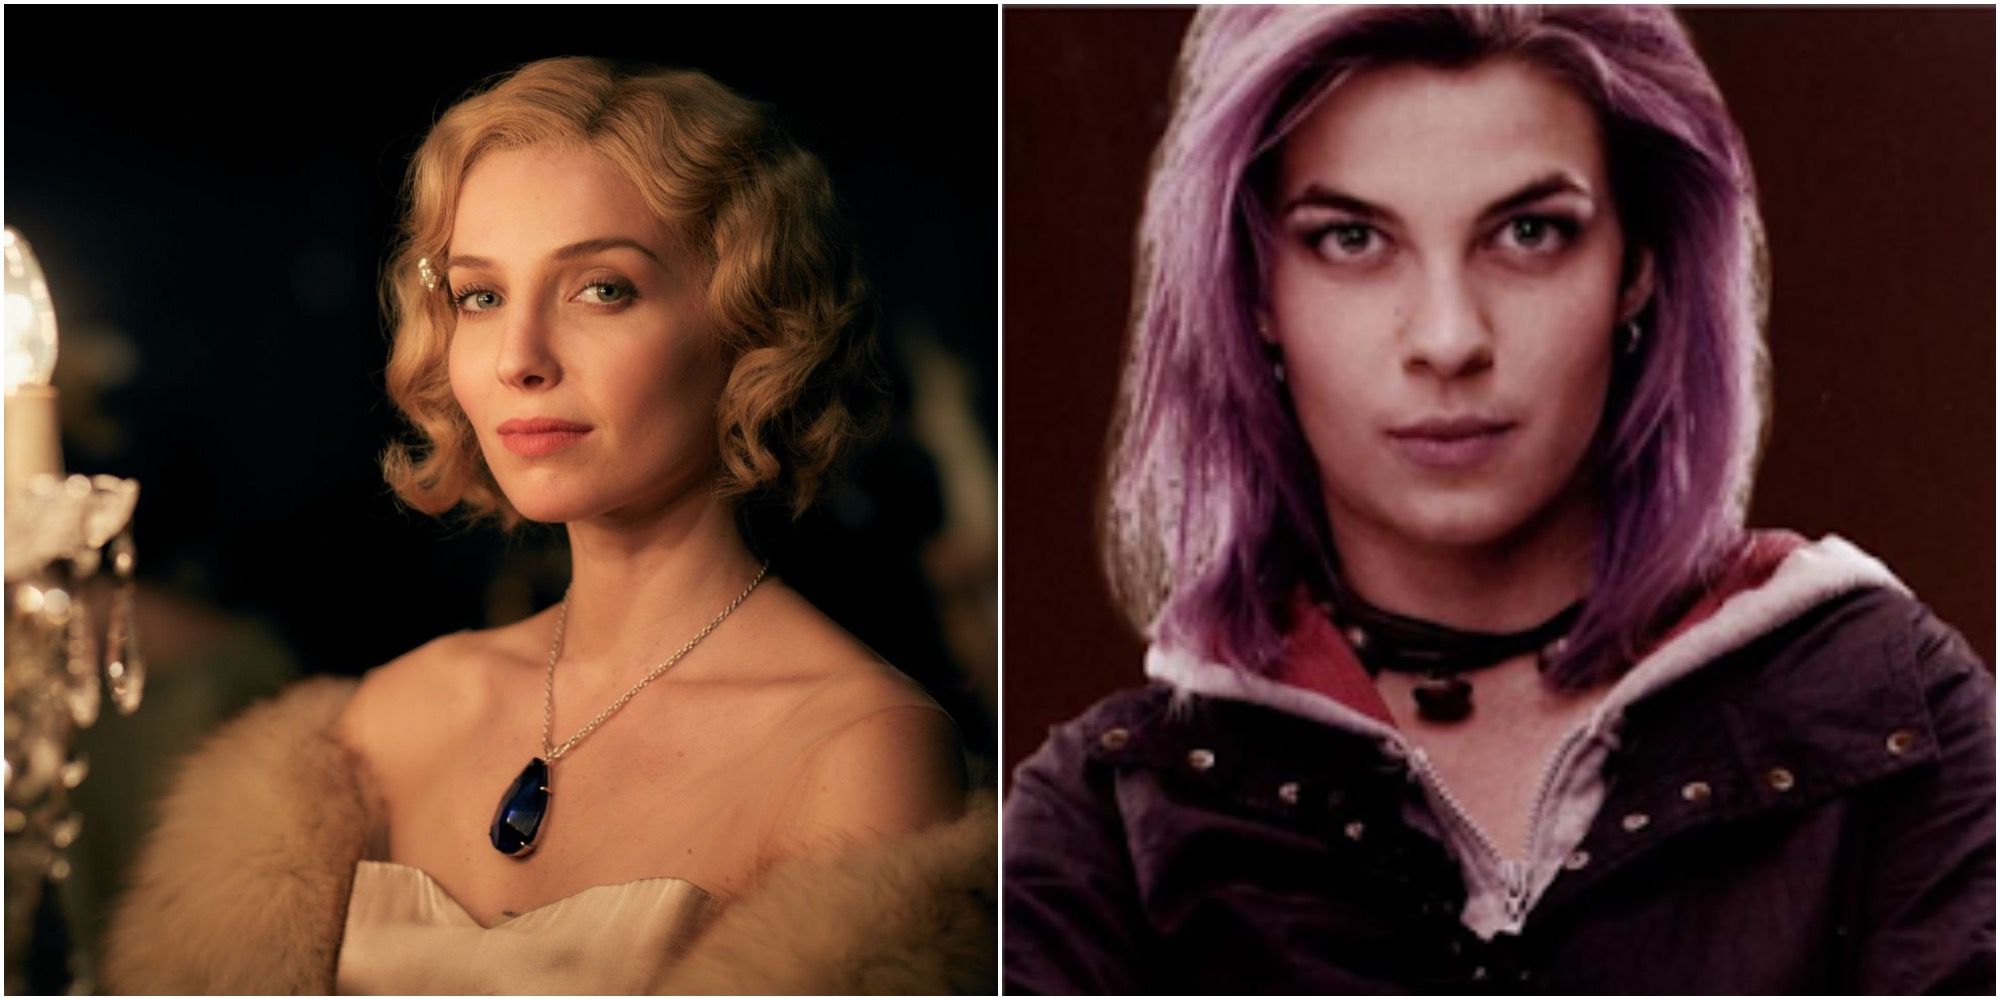 Split image of Grace Burgess-Shelby (Peaky Blinders) and Nymphadora Tonks (Harry Potter)